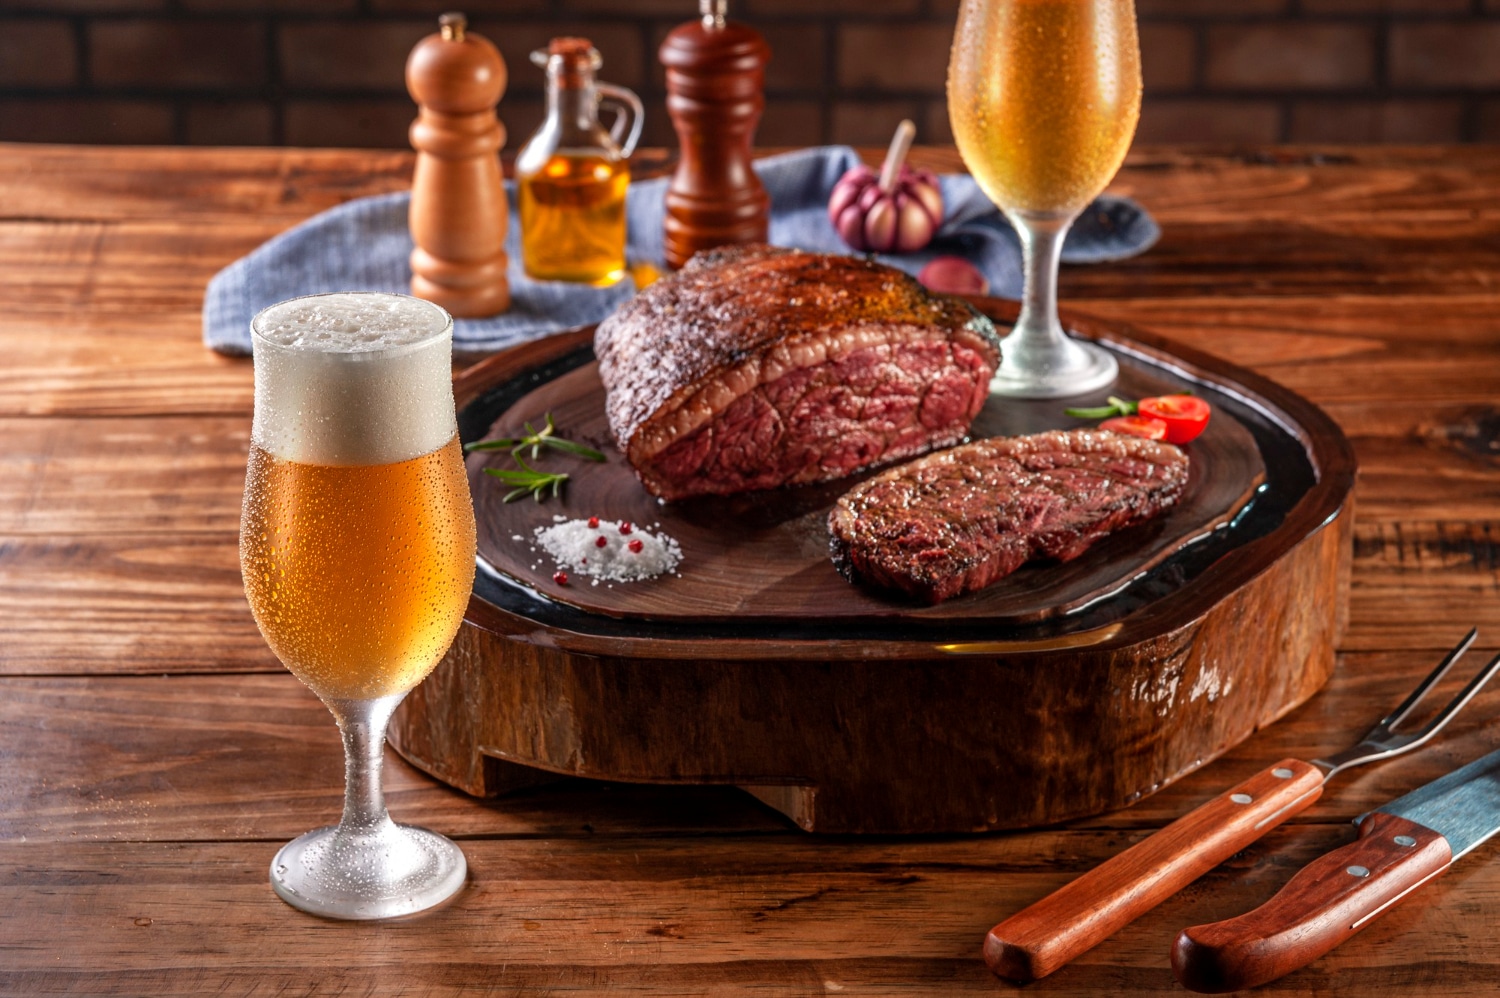 Two sweaty cold tulipa glasses of beer with grilled sliced cap rump steak on wooden cutting board (brazilian picanha).